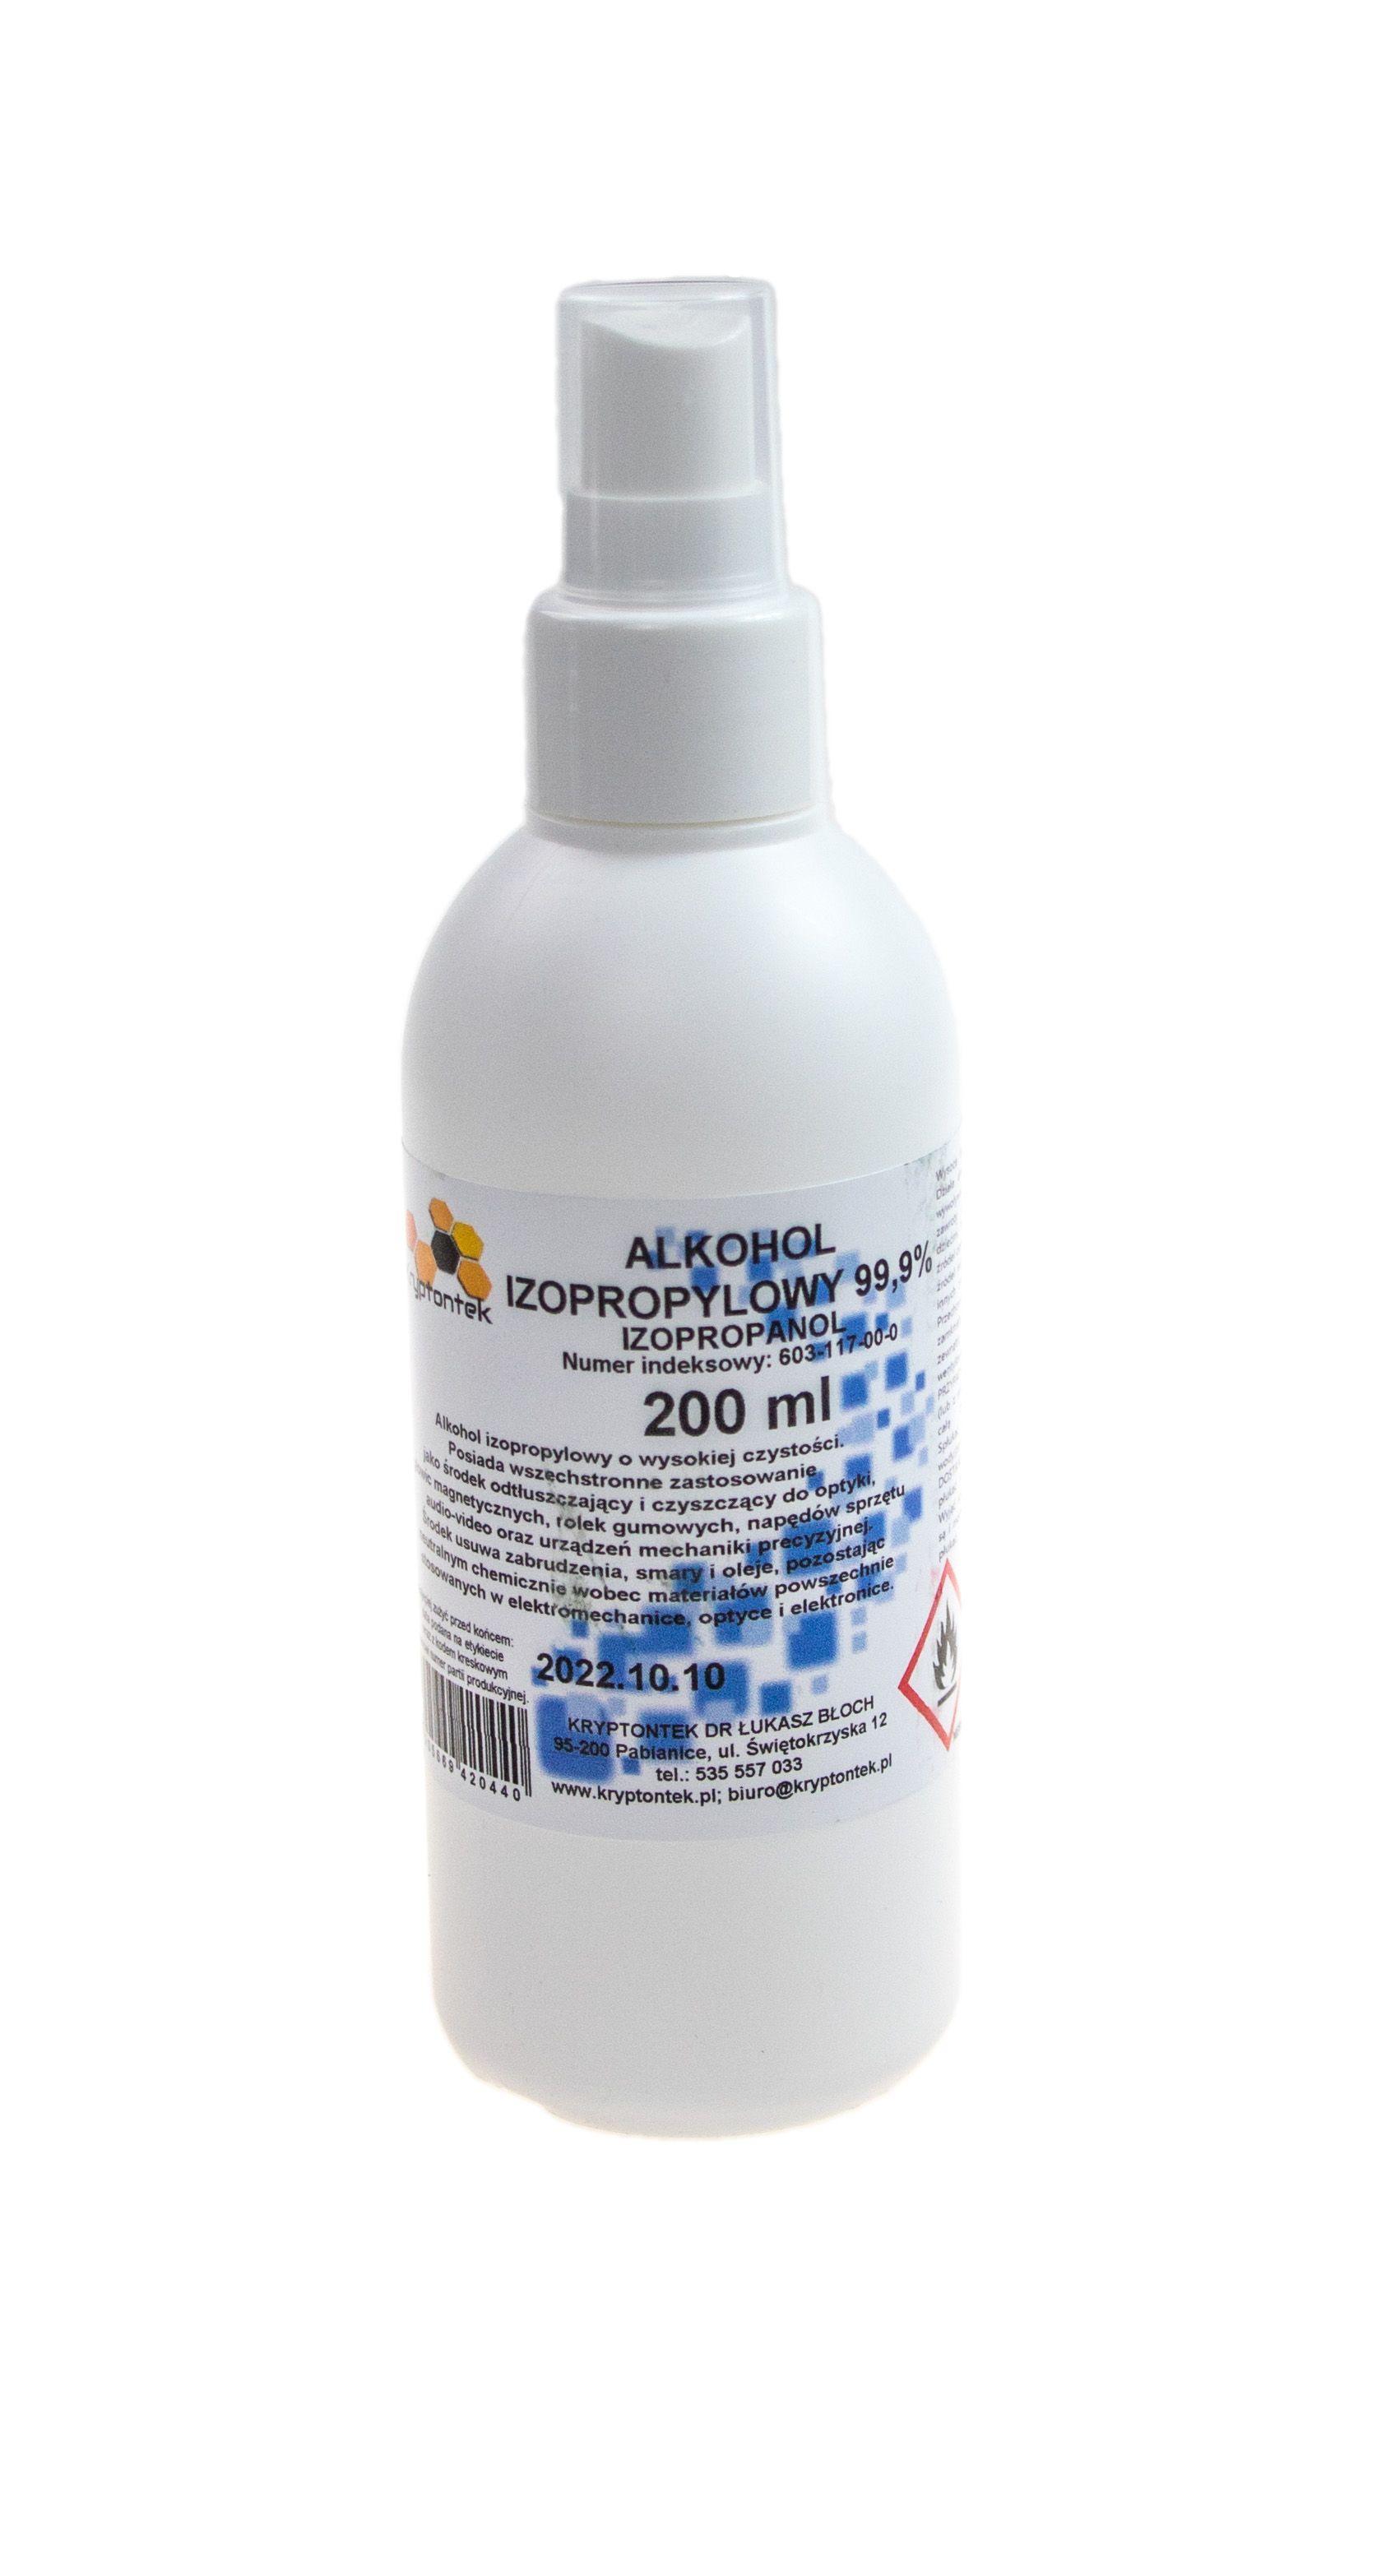 Isopropyl alcohol 99.9% 200ml with atomizer